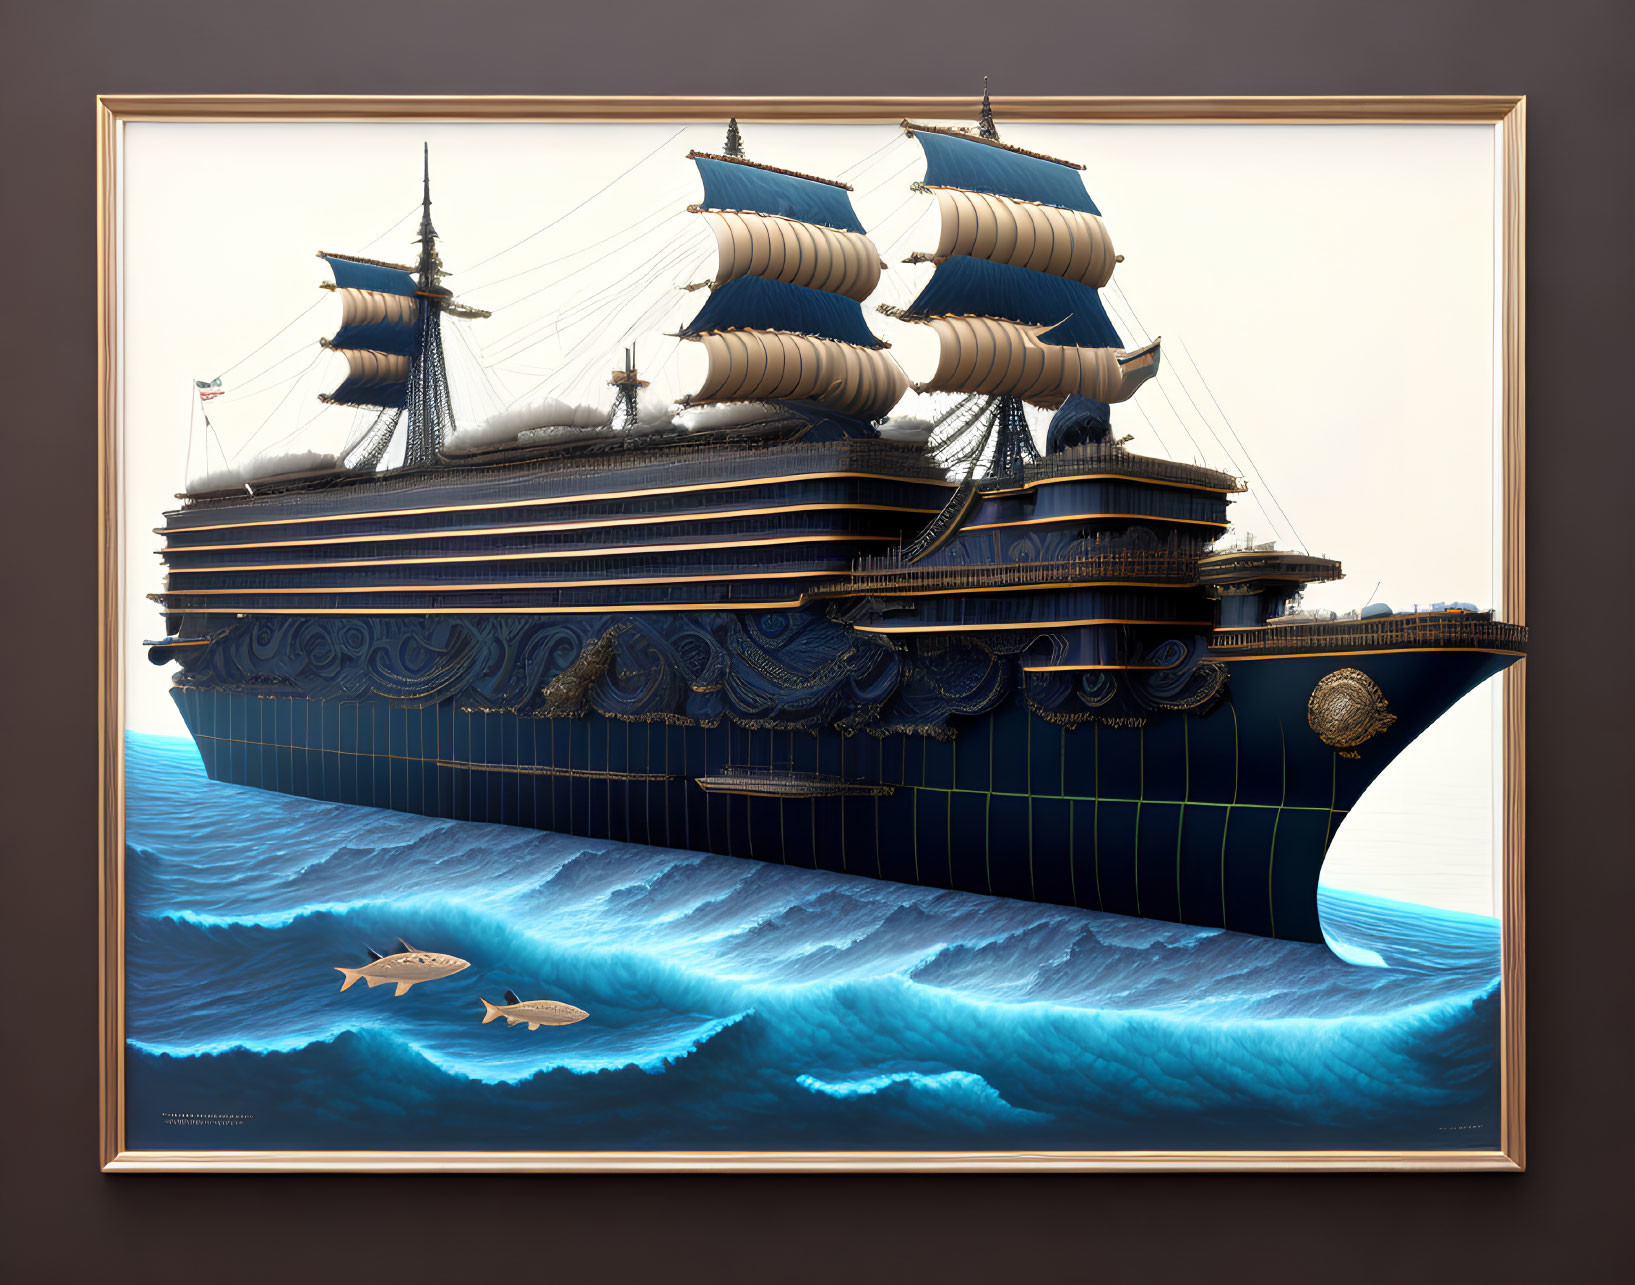 Ornate sailing ship with blue sails and dolphins in elegant frame